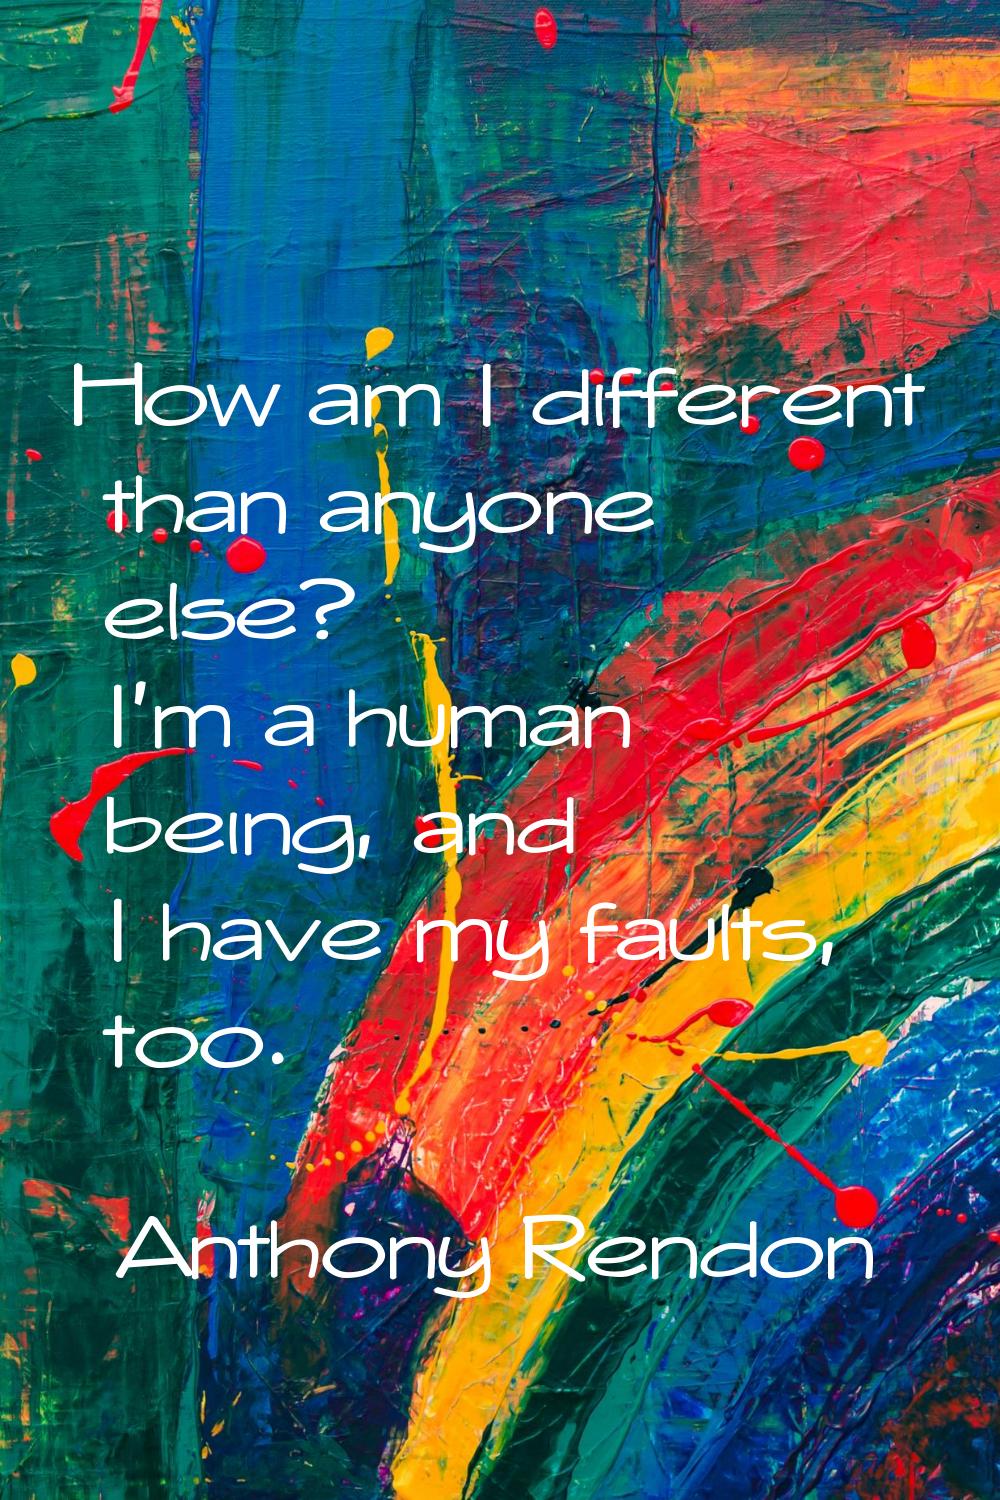 How am I different than anyone else? I'm a human being, and I have my faults, too.